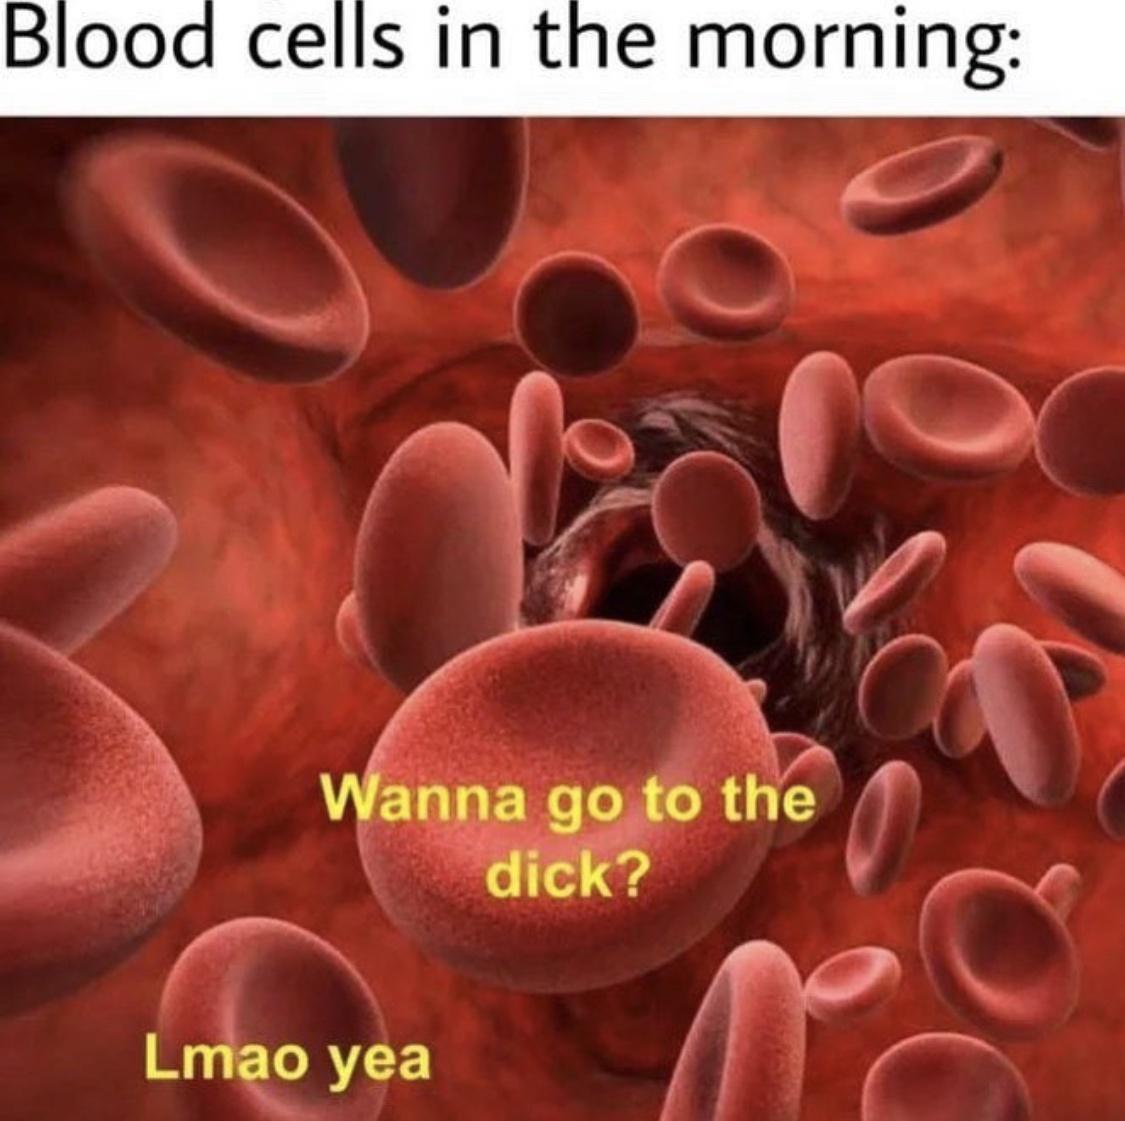 monday morning randomness - blood cells in the morning meme - Blood cells in the morning Wanna go to the dick? Lmao yea